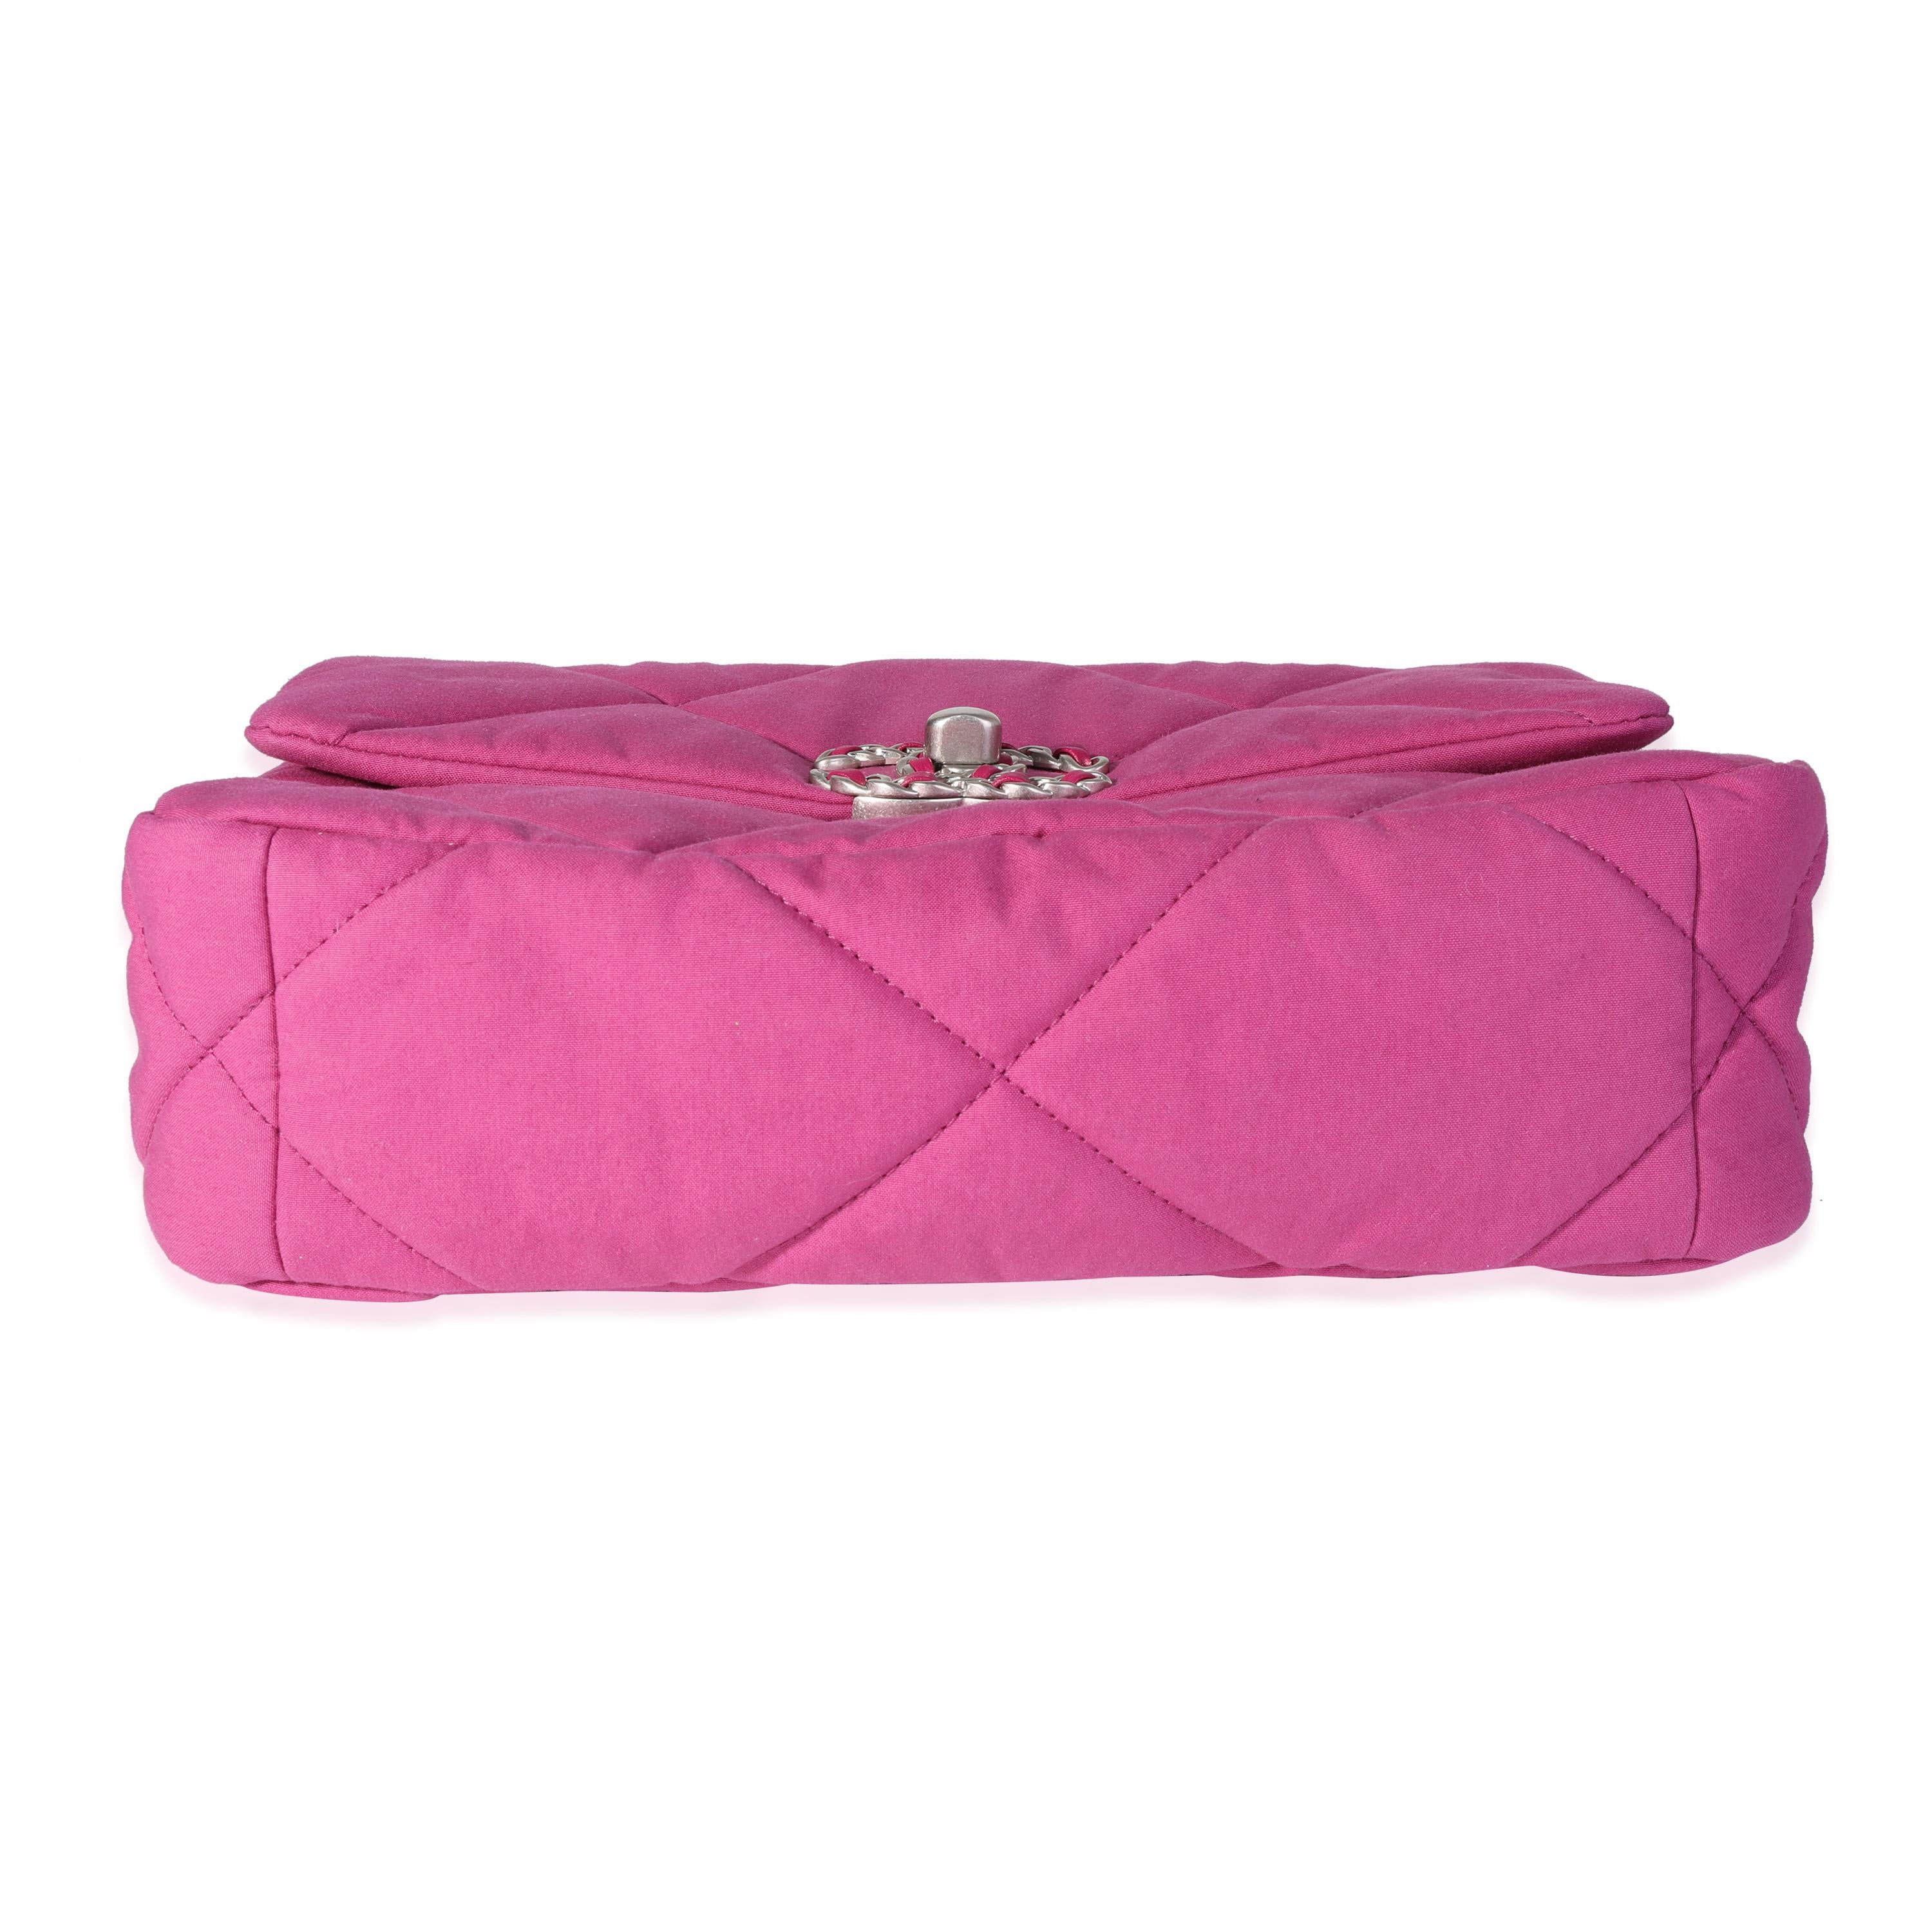 Pink Chanel Fuchsia Quilted Cotton Medium Chanel 19 Flap Bag